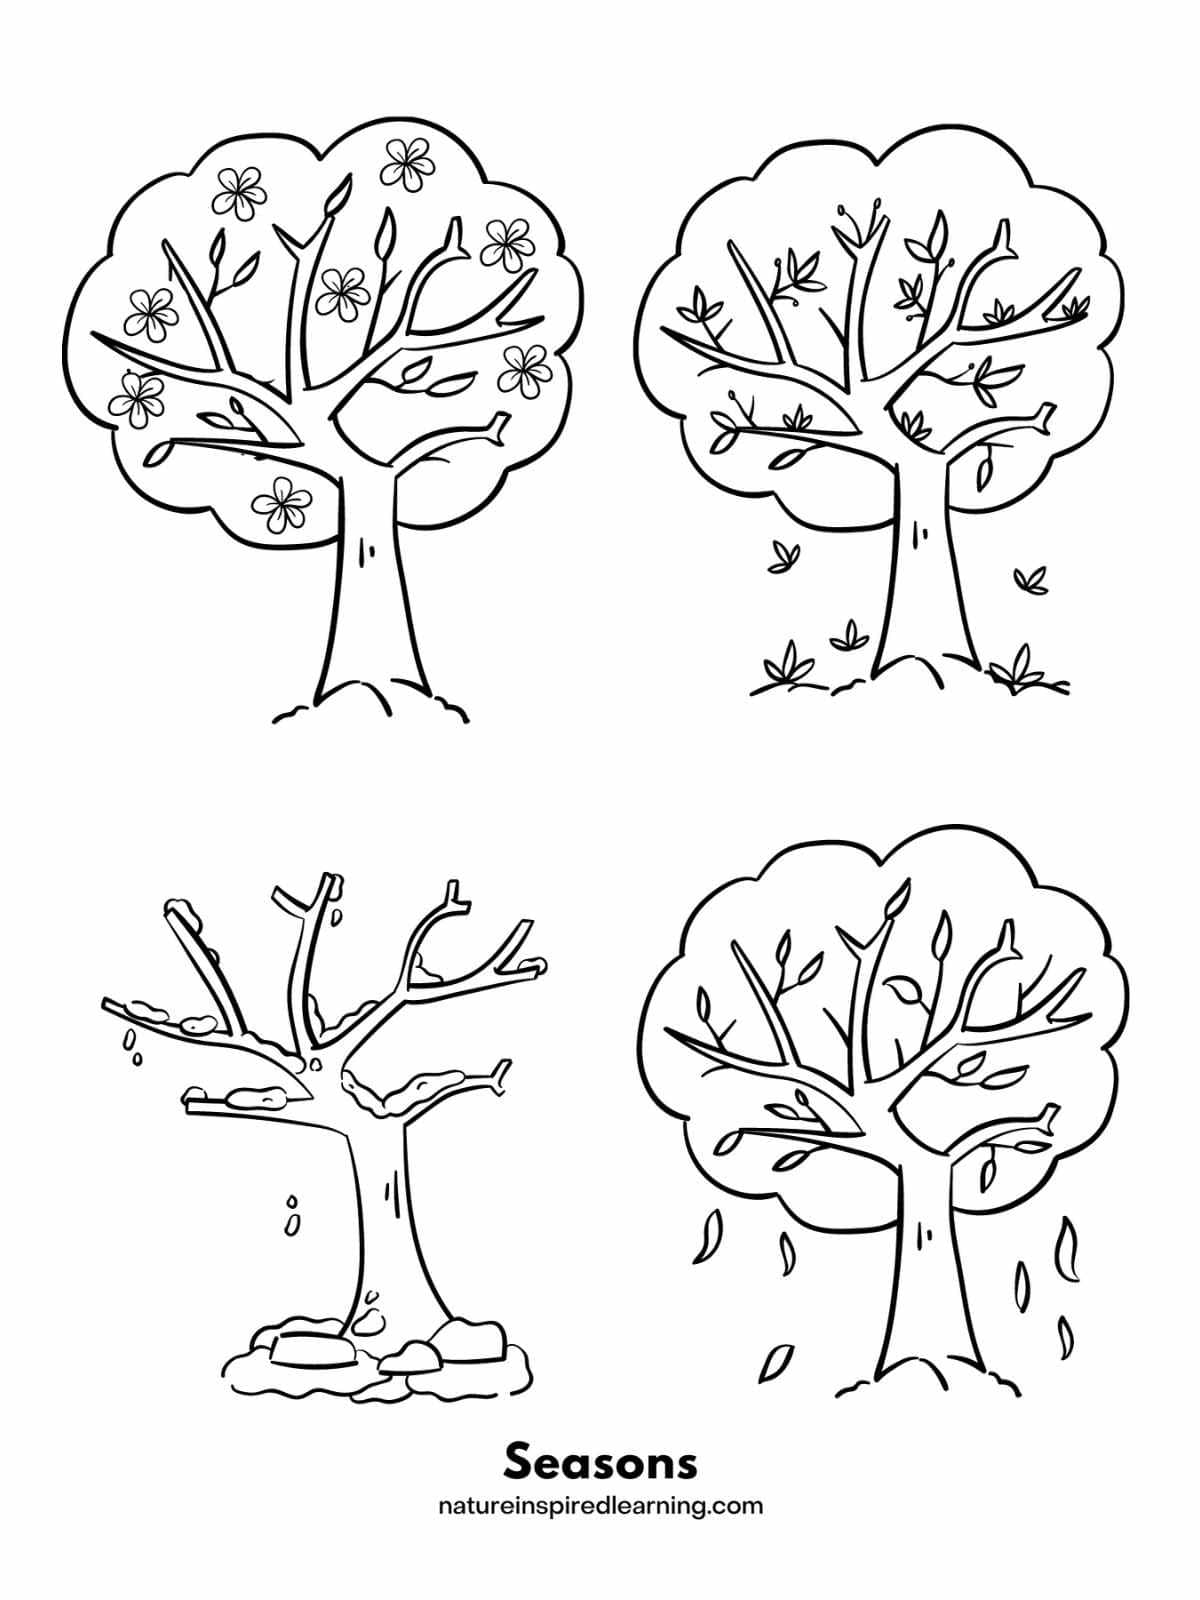 four simple trees one for each season apple tree, summer, fall tree, and bare tree with snow